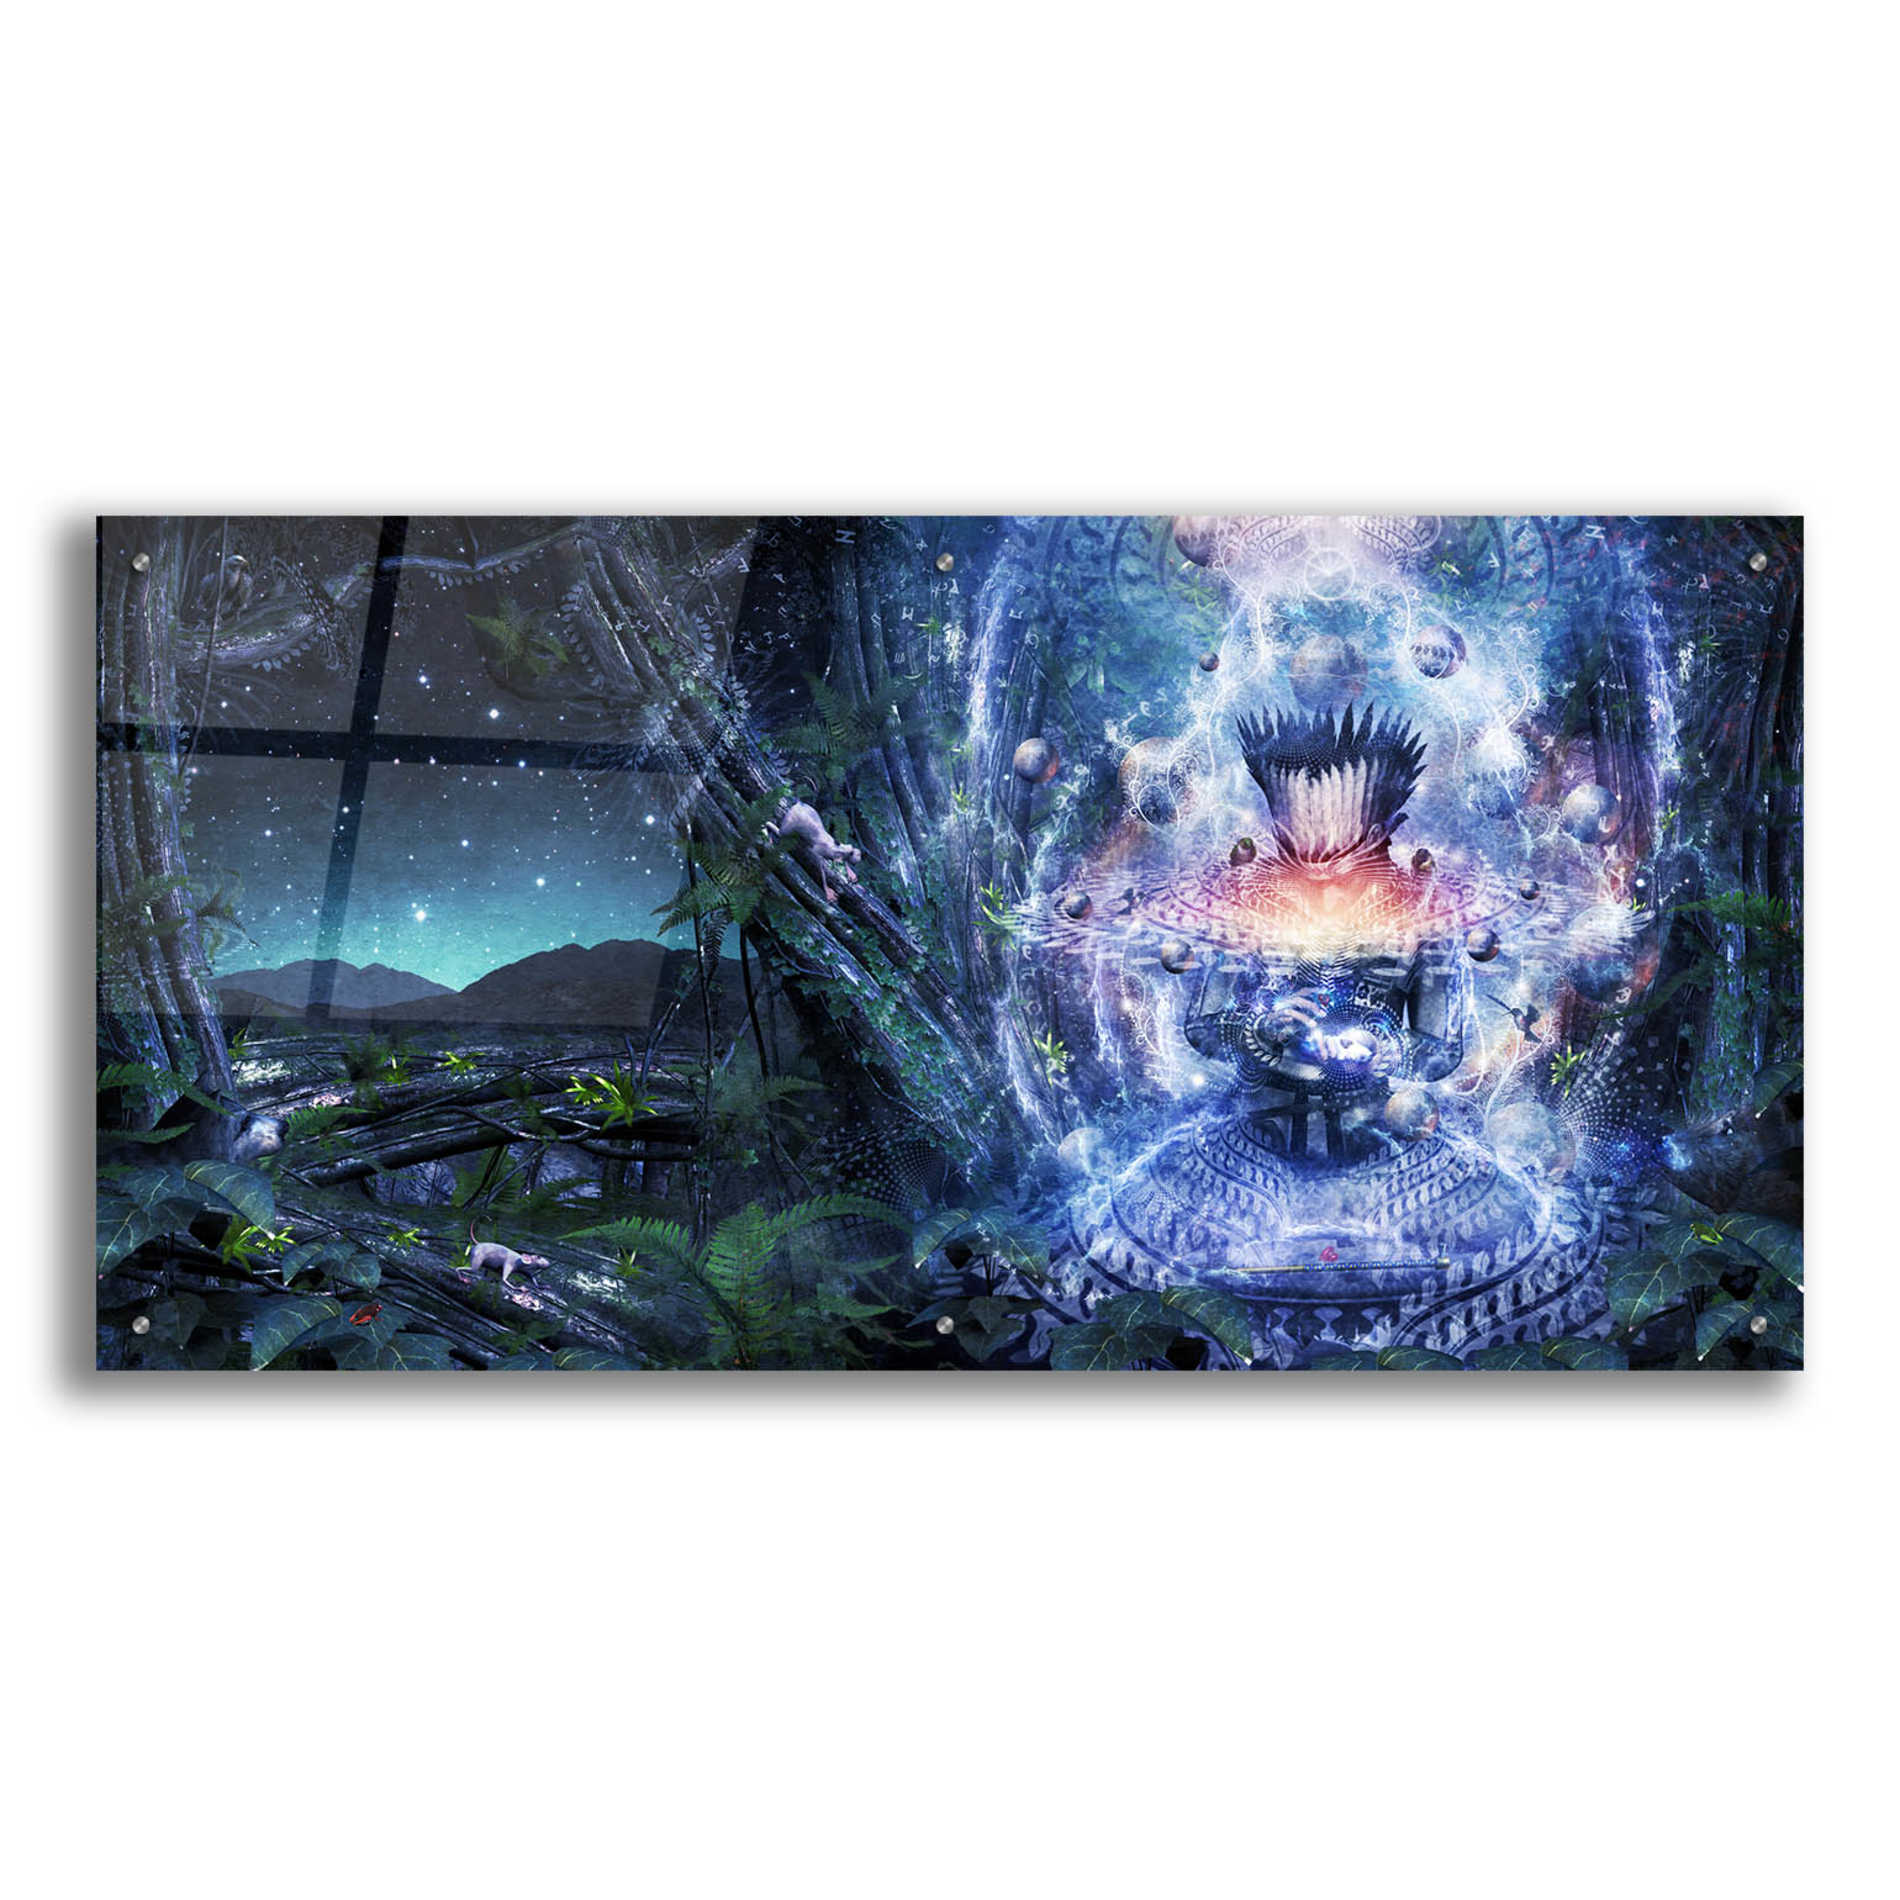 Epic Art 'From The Broken Grow The Saved' by Cameron Gray, Acrylic Glass Wall Art,48x24